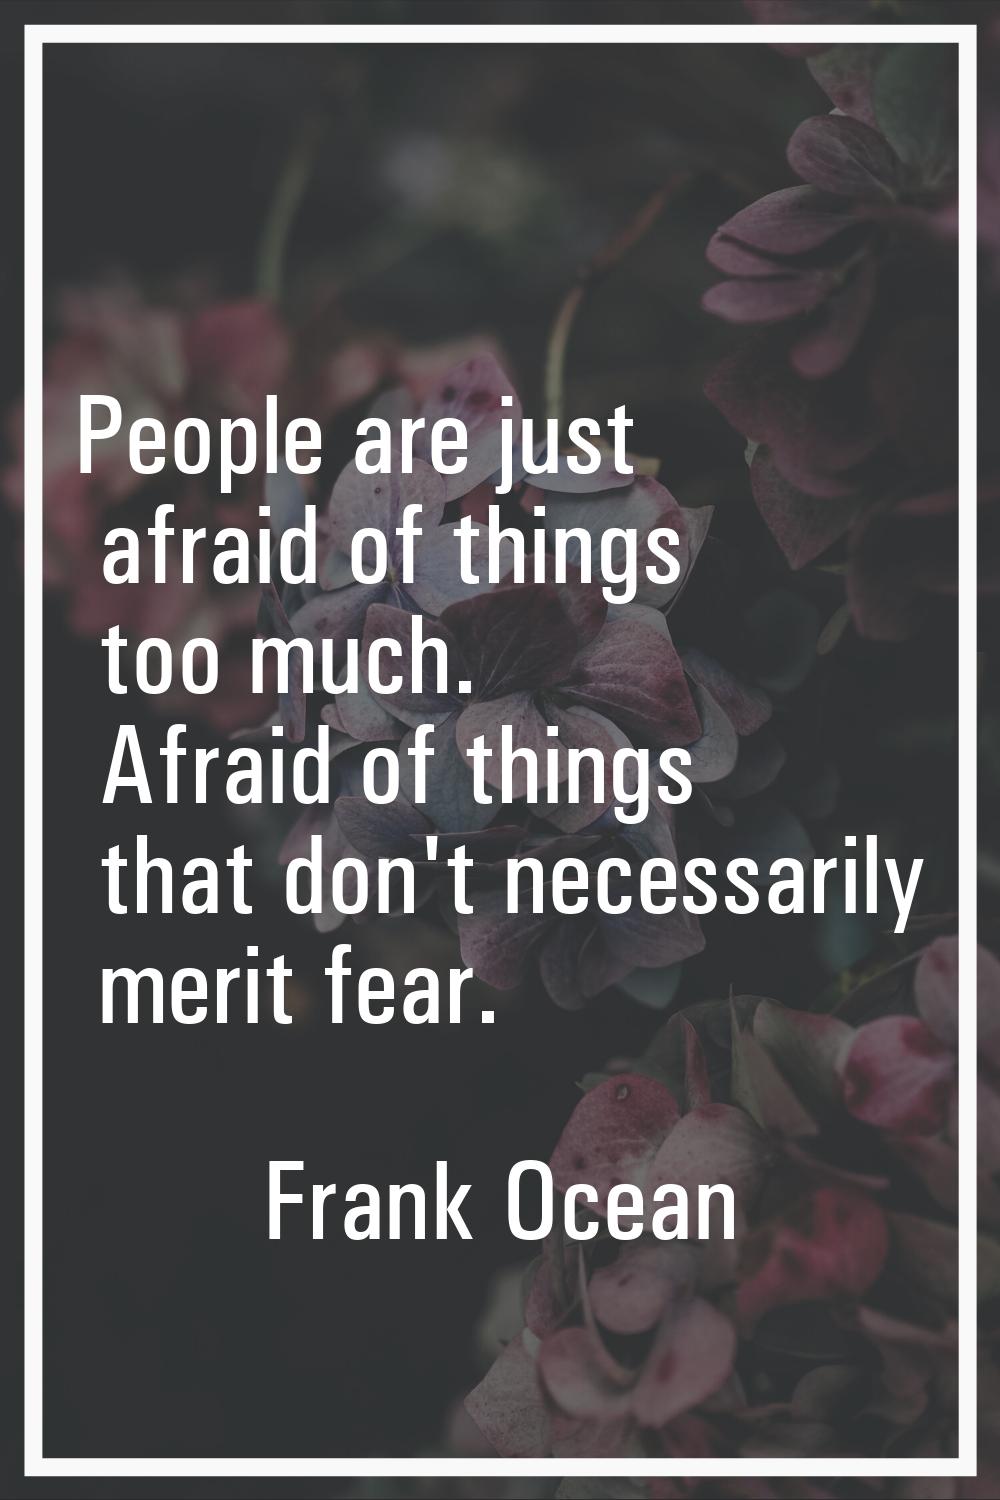 People are just afraid of things too much. Afraid of things that don't necessarily merit fear.